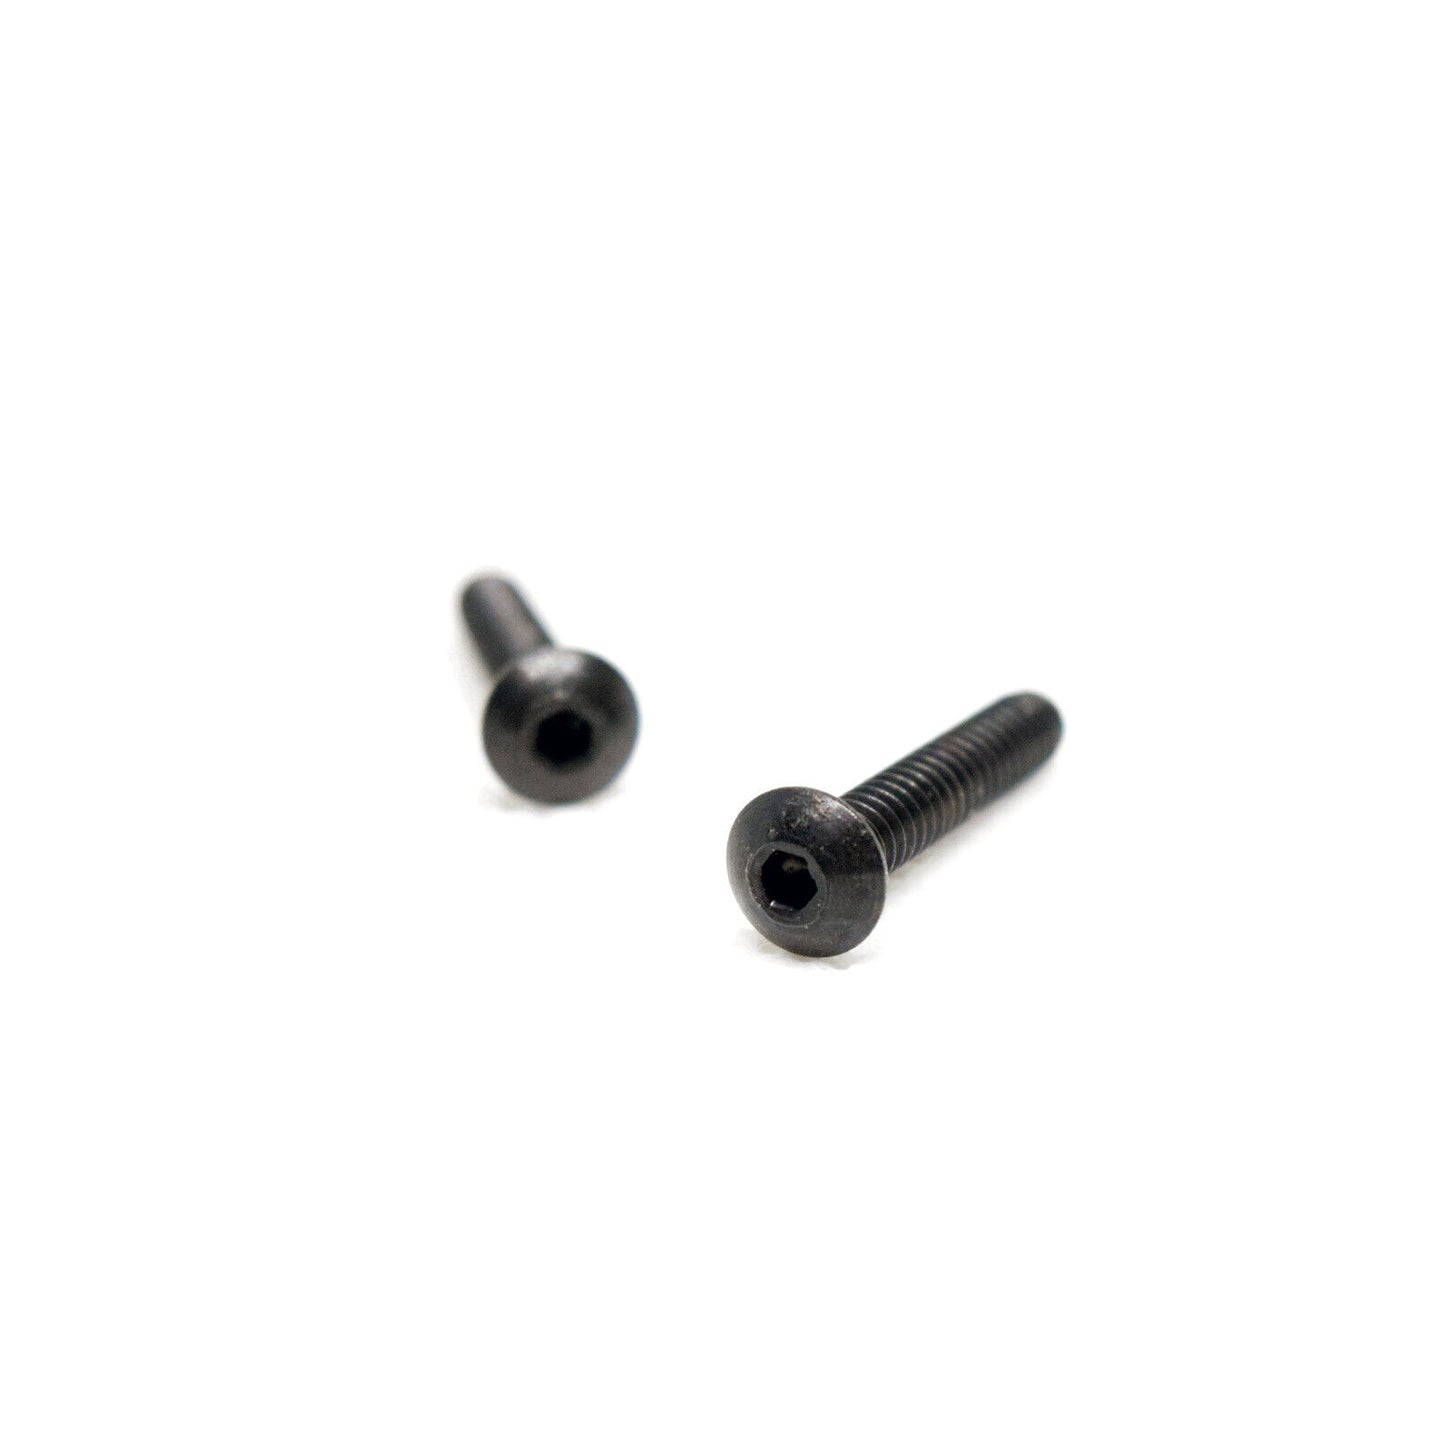 Crosman Hex Head Pump Forearm Fore Arm Foreend Screws for 1322, 1377, and PC77